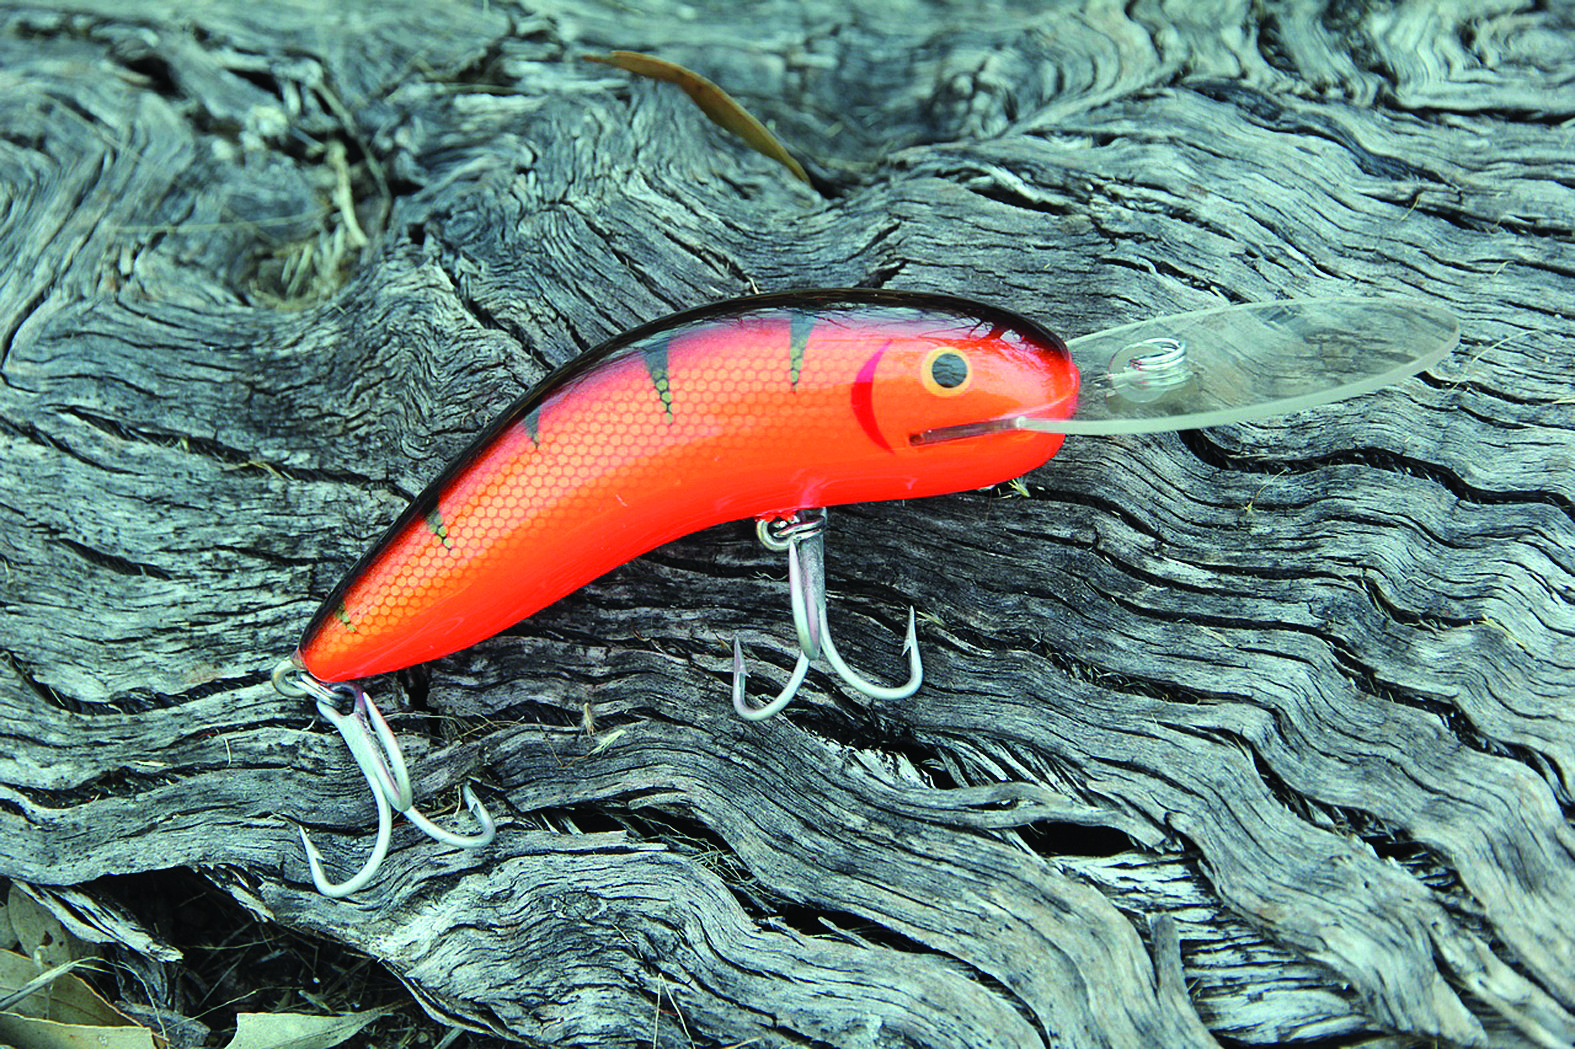 During the past four decades the author has used a lot of cod lures including some of the most renowned such as the Kadaitcha. He would rate the Cod Lolly among the top five without hesitation. It is Australian designed and owned. Yes its manufacture has been outsourced overseas but it is still much more Australian than the $35 bibless rattlers many are throwing at bass!